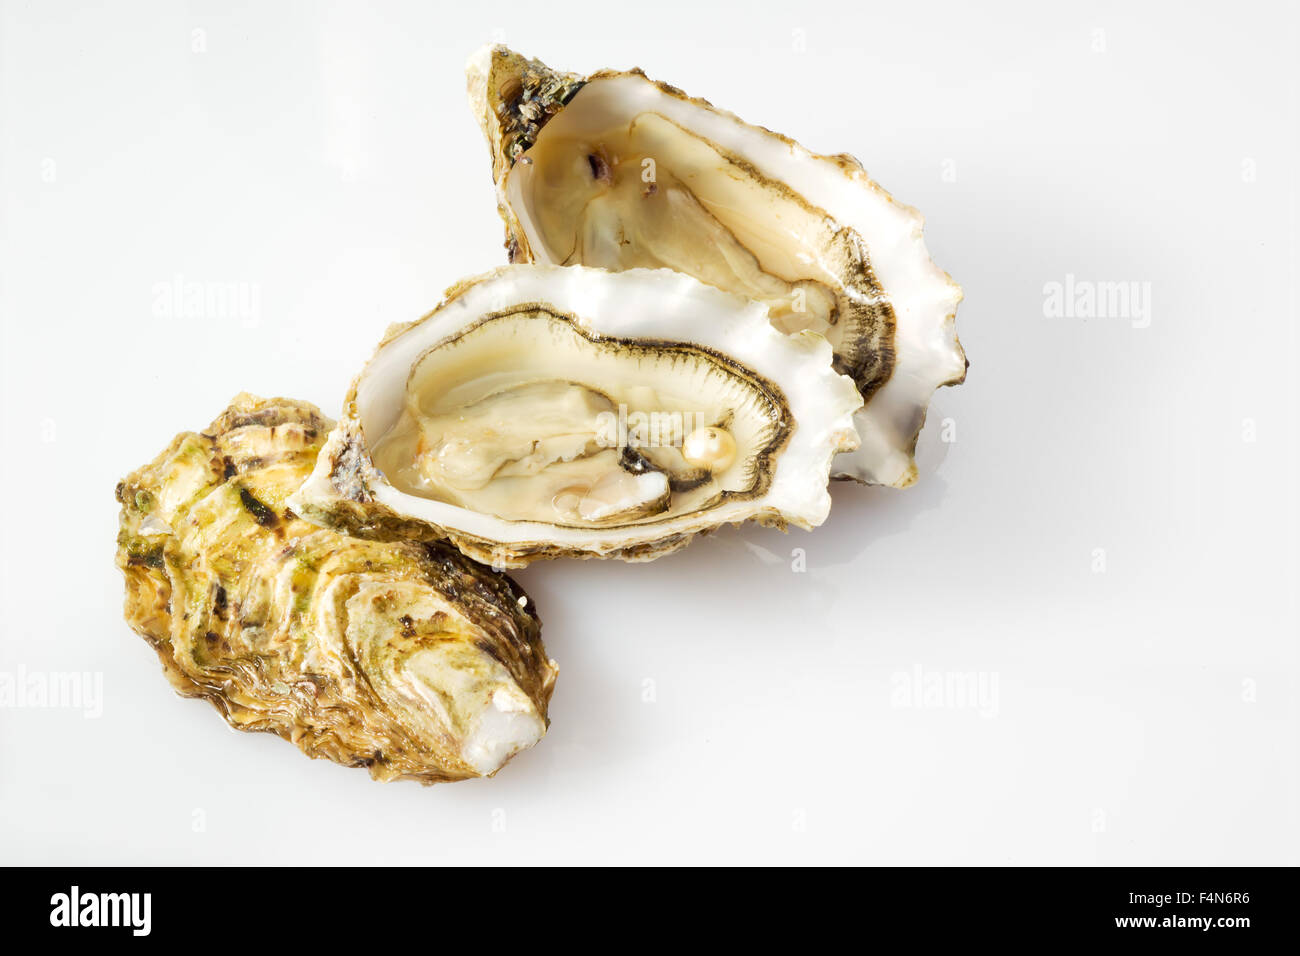 Oyster with pearl Stock Photo